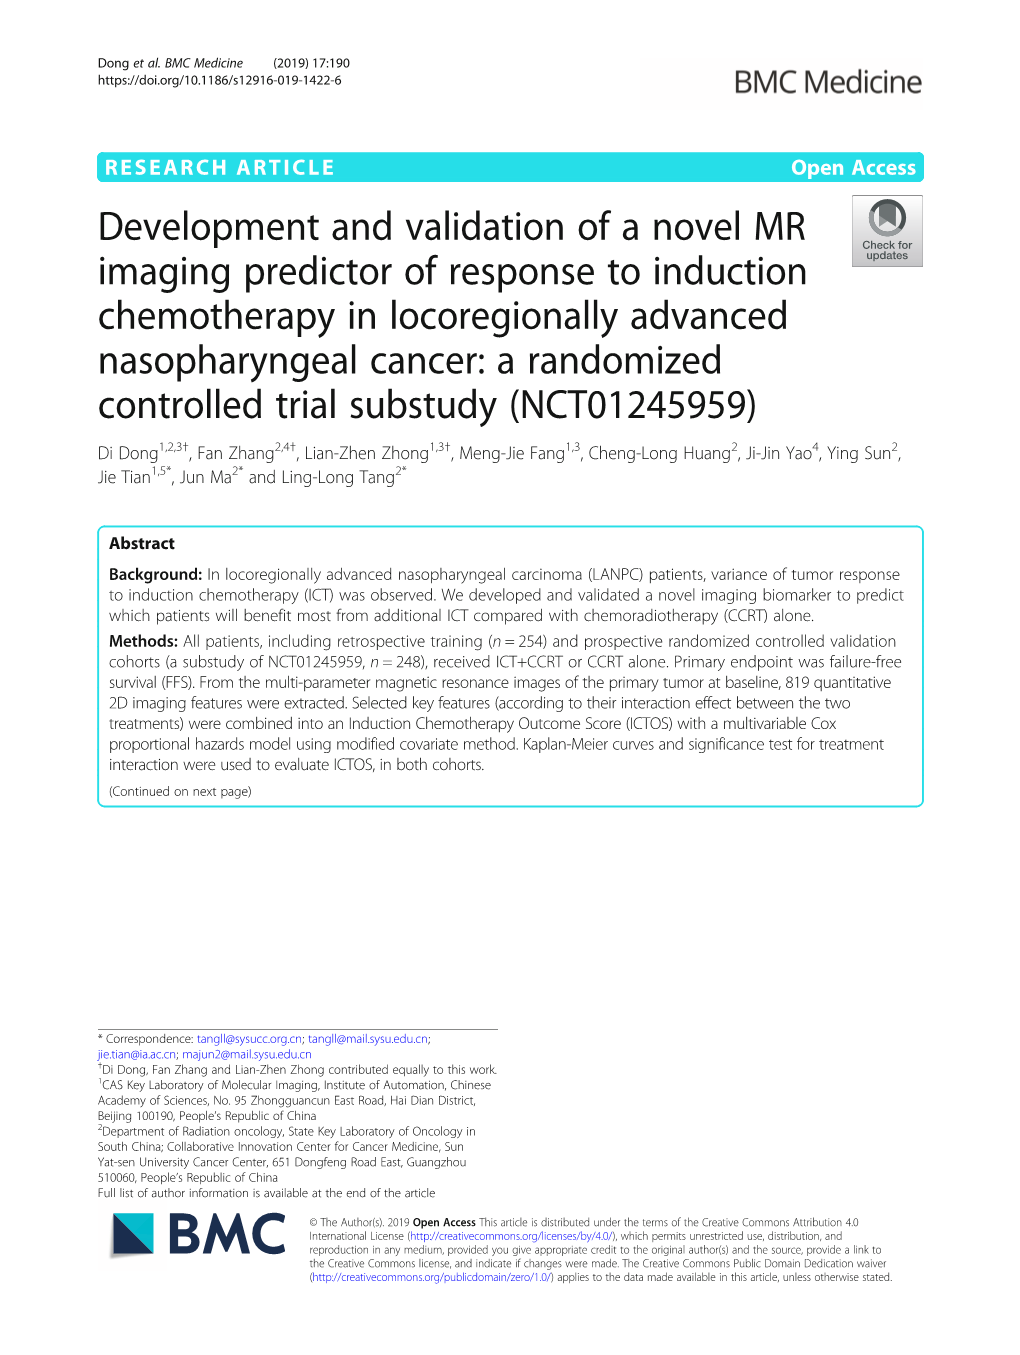 Development and Validation of a Novel MR Imaging Predictor of Response